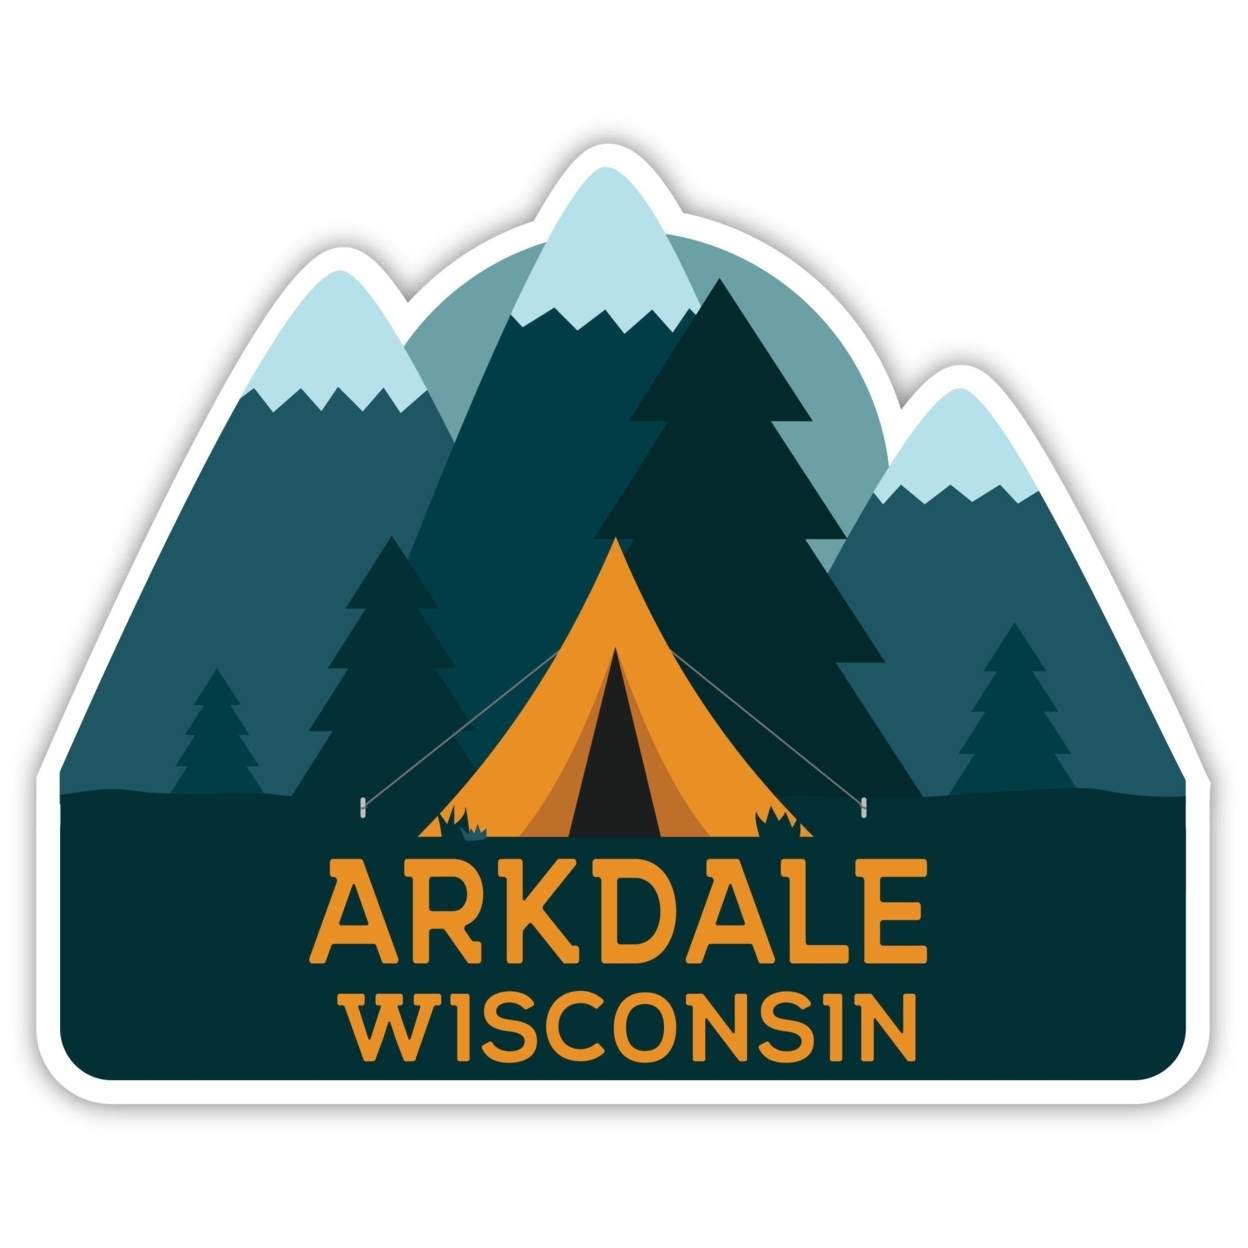 Arkdale Wisconsin Souvenir Decorative Stickers (Choose Theme And Size) - Single Unit, 12-Inch, Tent